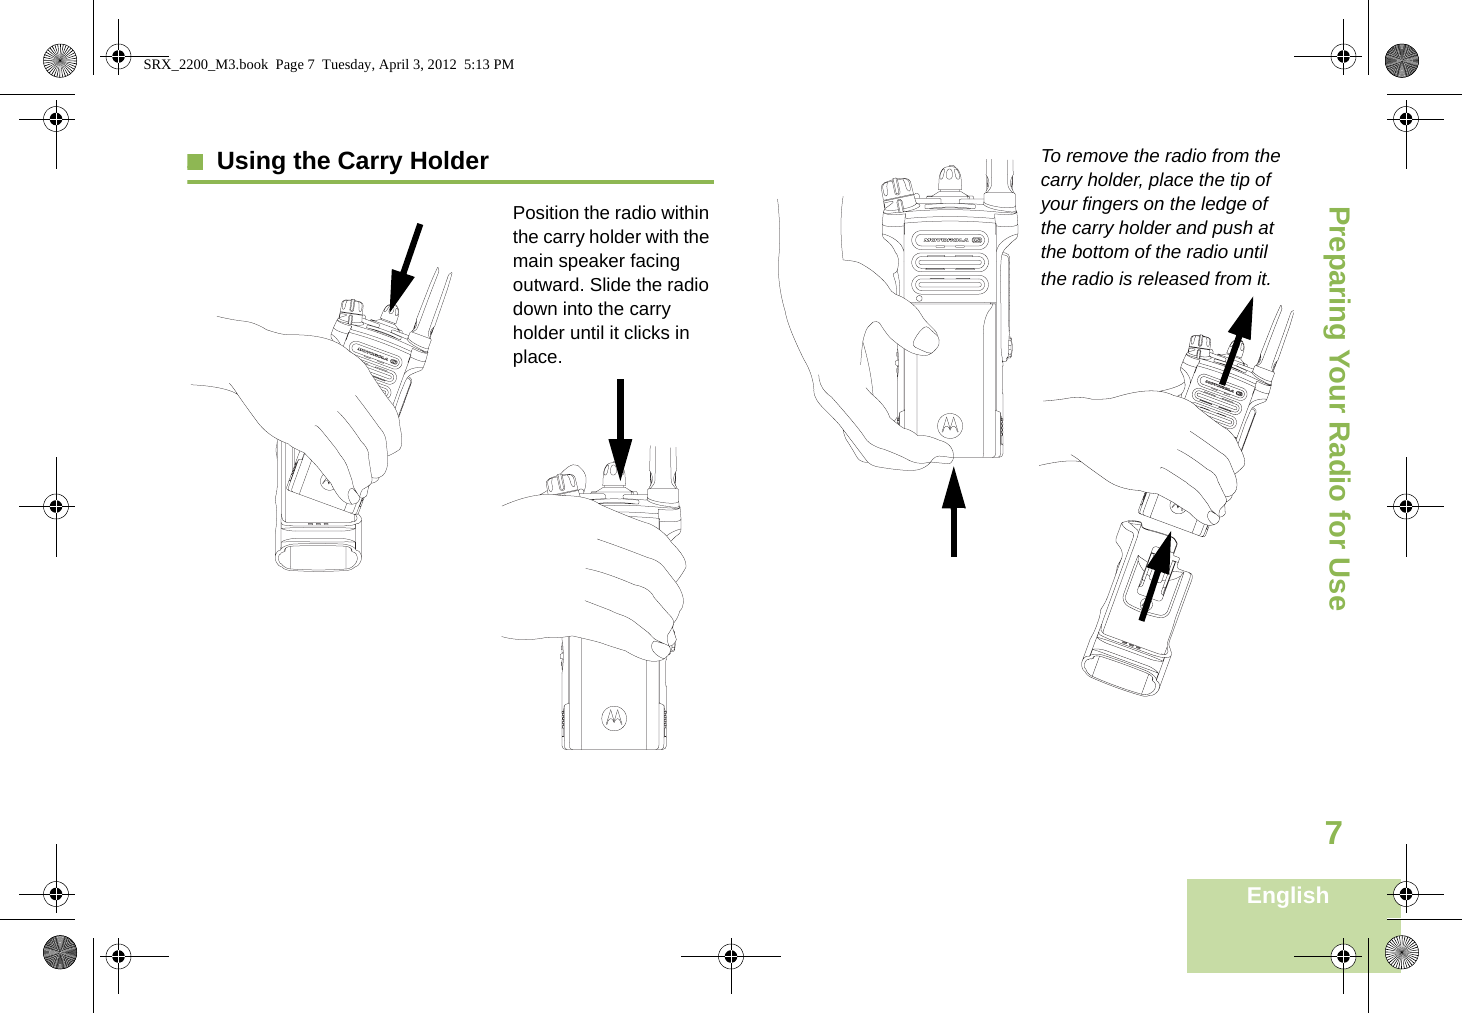 Preparing Your Radio for UseEnglish7Using the Carry HolderPosition the radio within the carry holder with the main speaker facing outward. Slide the radio down into the carry holder until it clicks in place.To remove the radio from the carry holder, place the tip of your fingers on the ledge of the carry holder and push at the bottom of the radio until the radio is released from it.   SRX_2200_M3.book  Page 7  Tuesday, April 3, 2012  5:13 PM